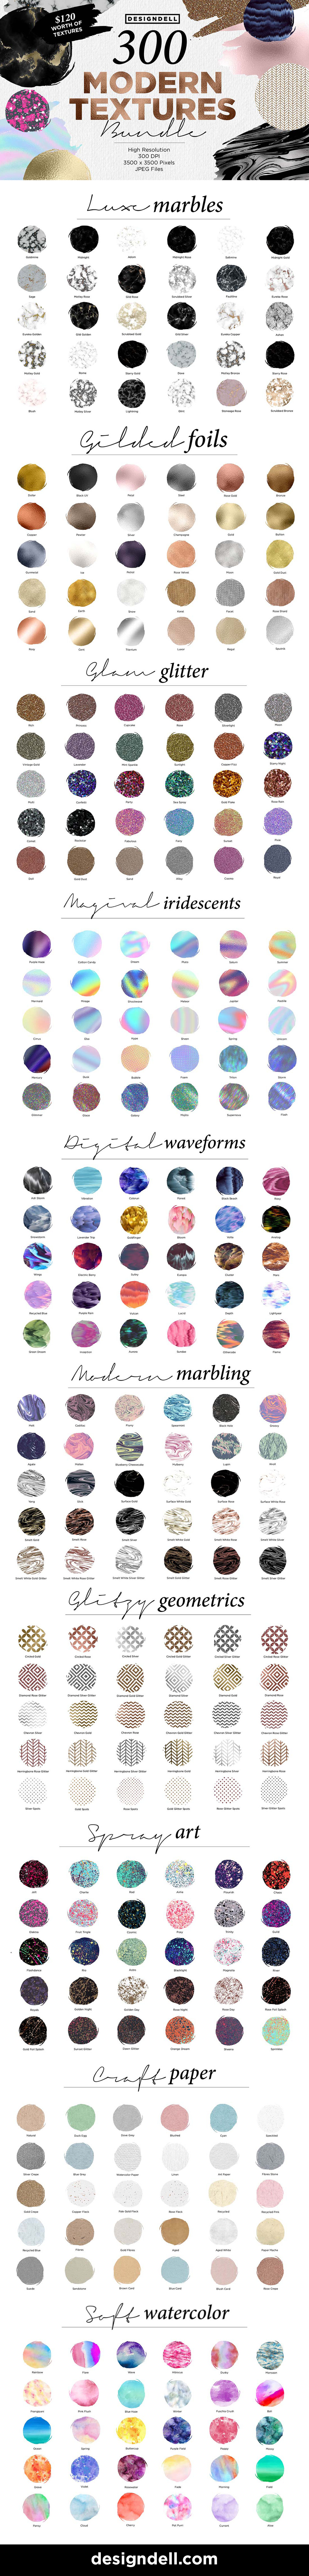 300 Modern Textures Bundle - Shimmering Foils, Iridescent Holographics, Luxe Marbles, Glitches, Glitters, Watercolors and much more!